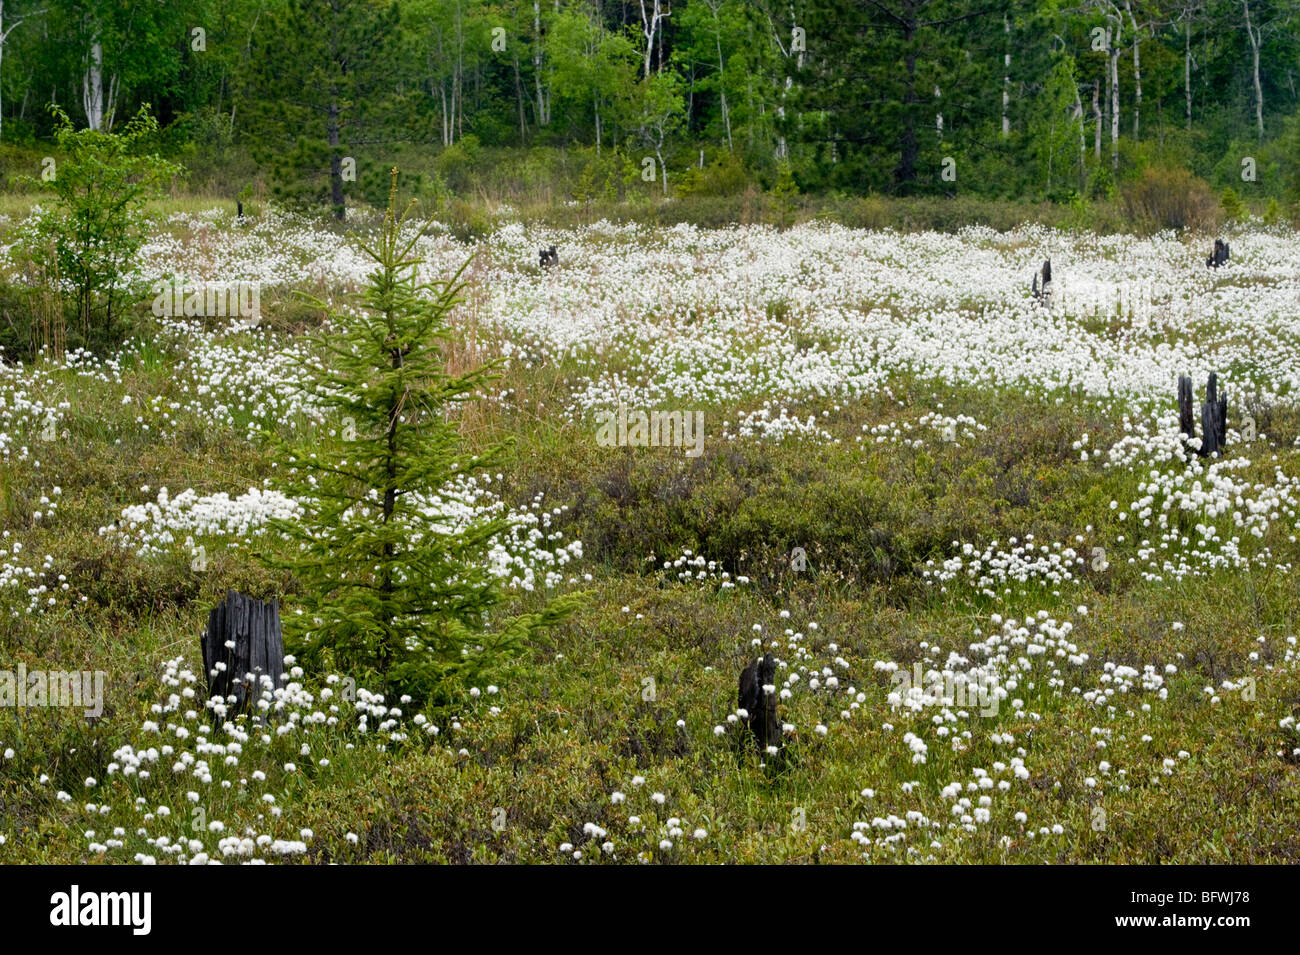 Leatherleaf bog with blooming cottongrass sedges, Greater Sudbury, Ontario, Canada Stock Photo